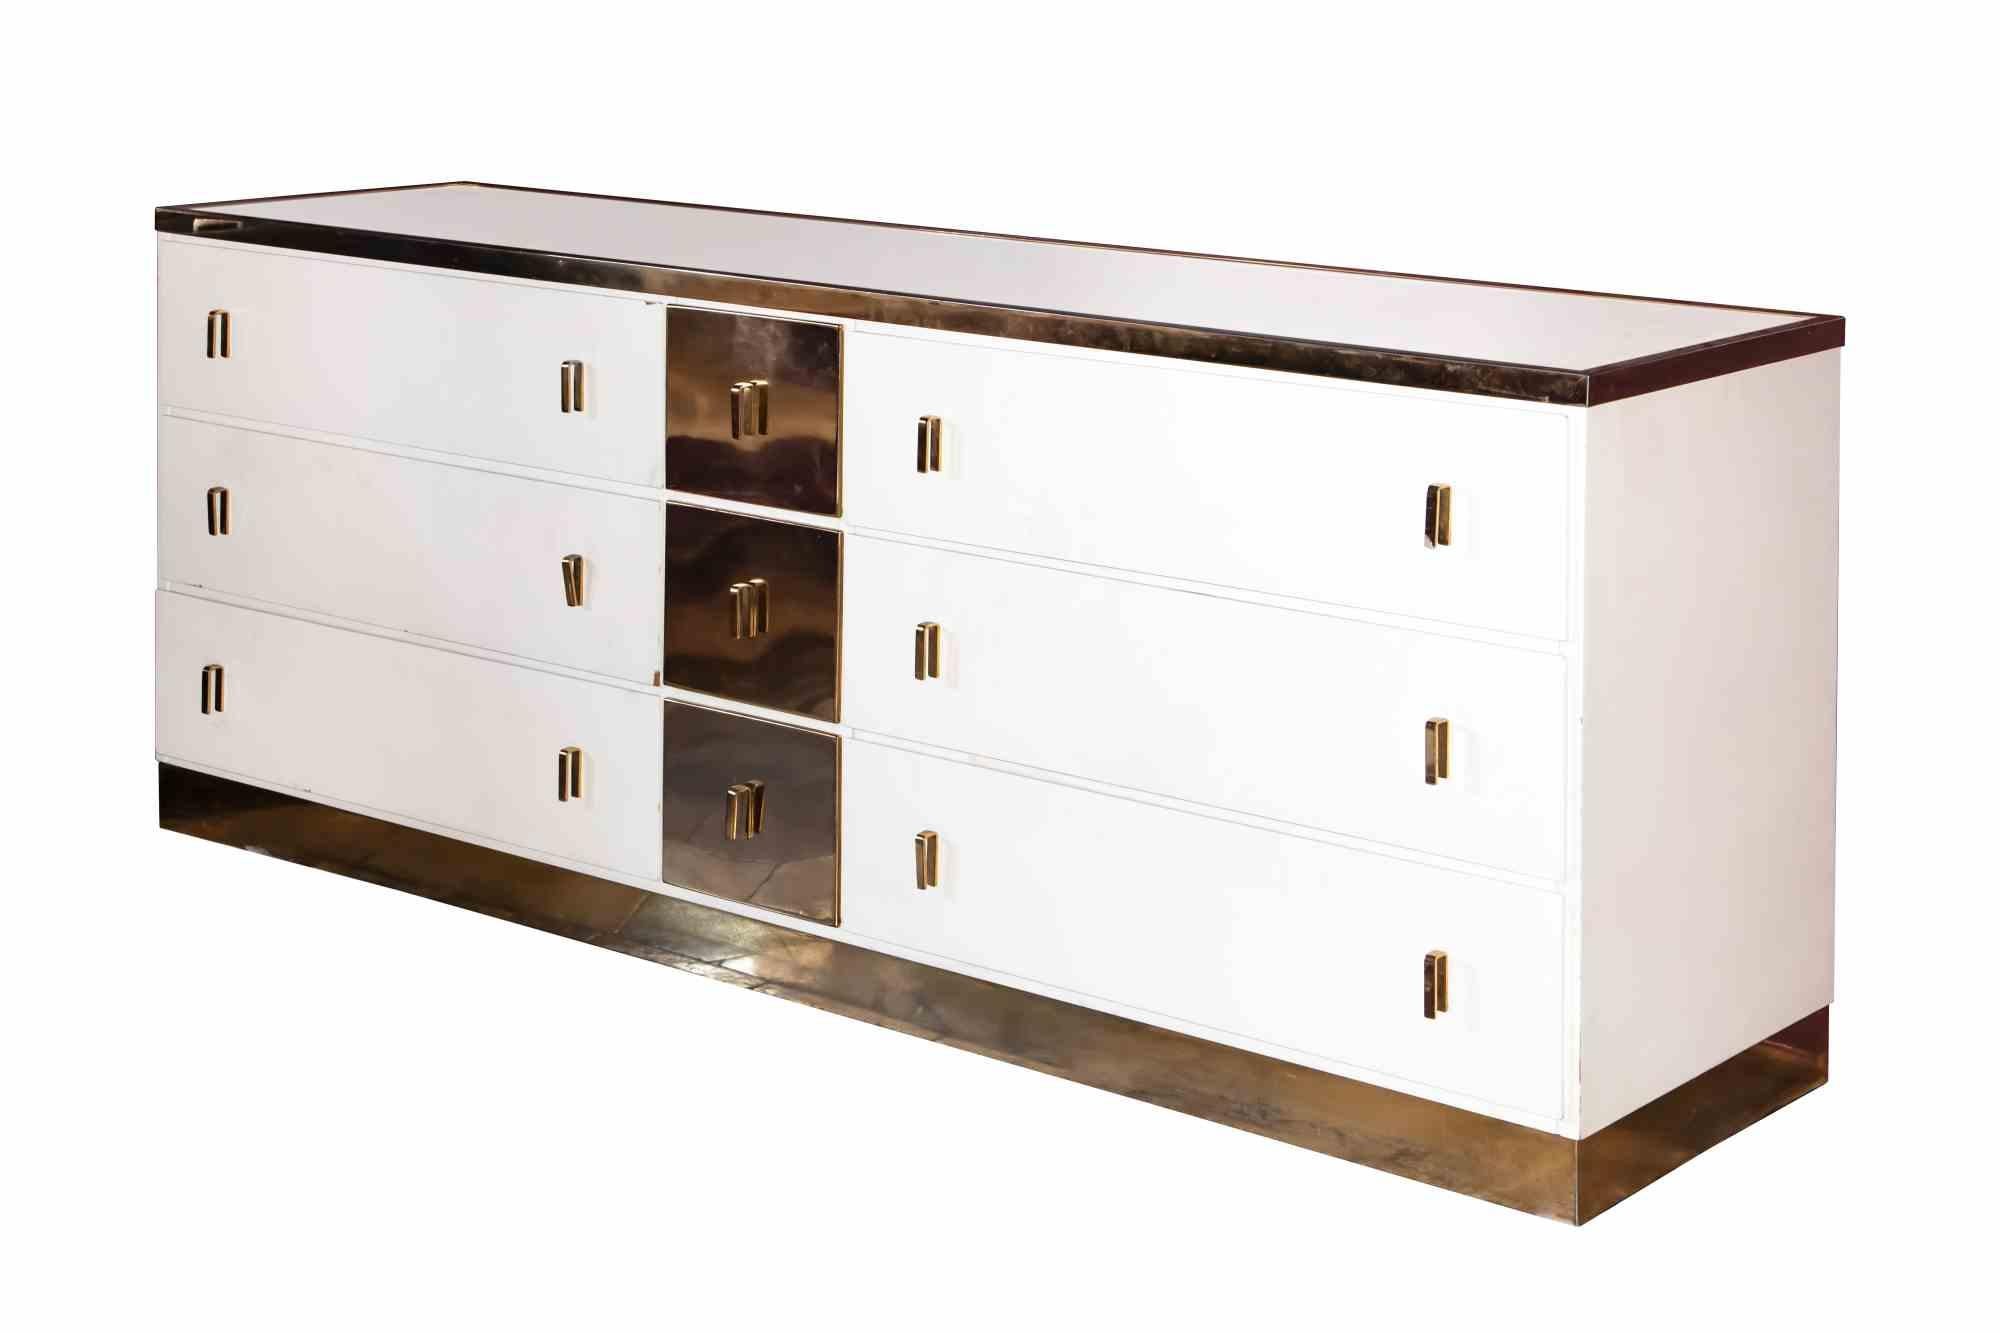 Sideboard Bagdad is an original contemporary Artwork realized in Italy in the 1970s by Luciano Frigerio (Desio, 1928 – Sanremo, 1999).

Lacquered wood and brass.

Made in Italy.

Created for Mobili nella Valle.

Total dimensions: 76.5 cm x